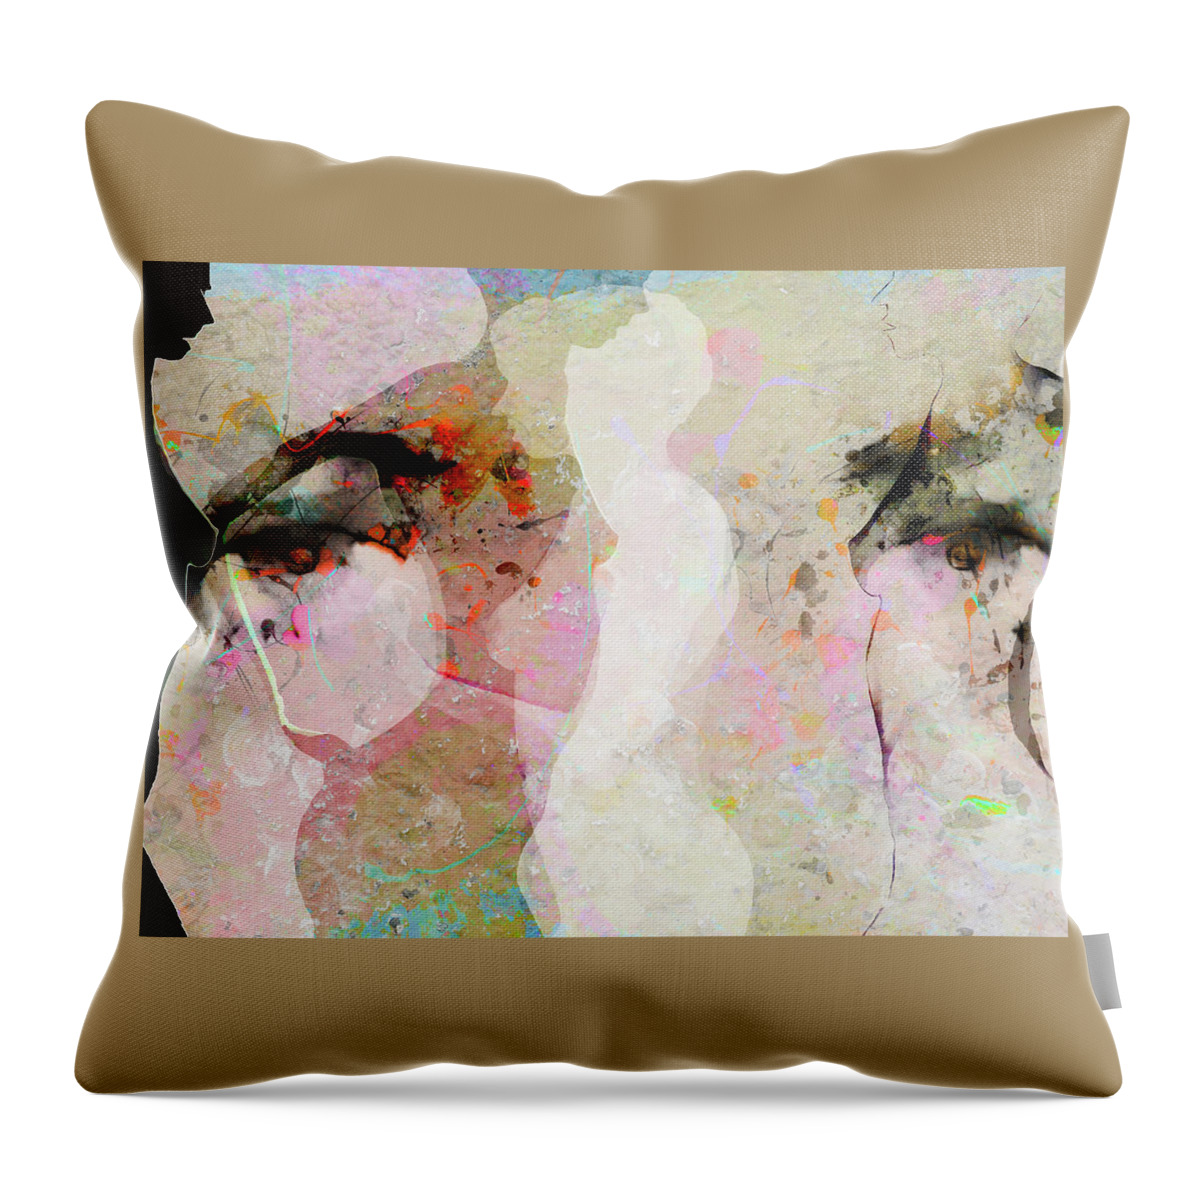 People Watching Throw Pillow featuring the photograph People Watching - Passersby by Ed Hall